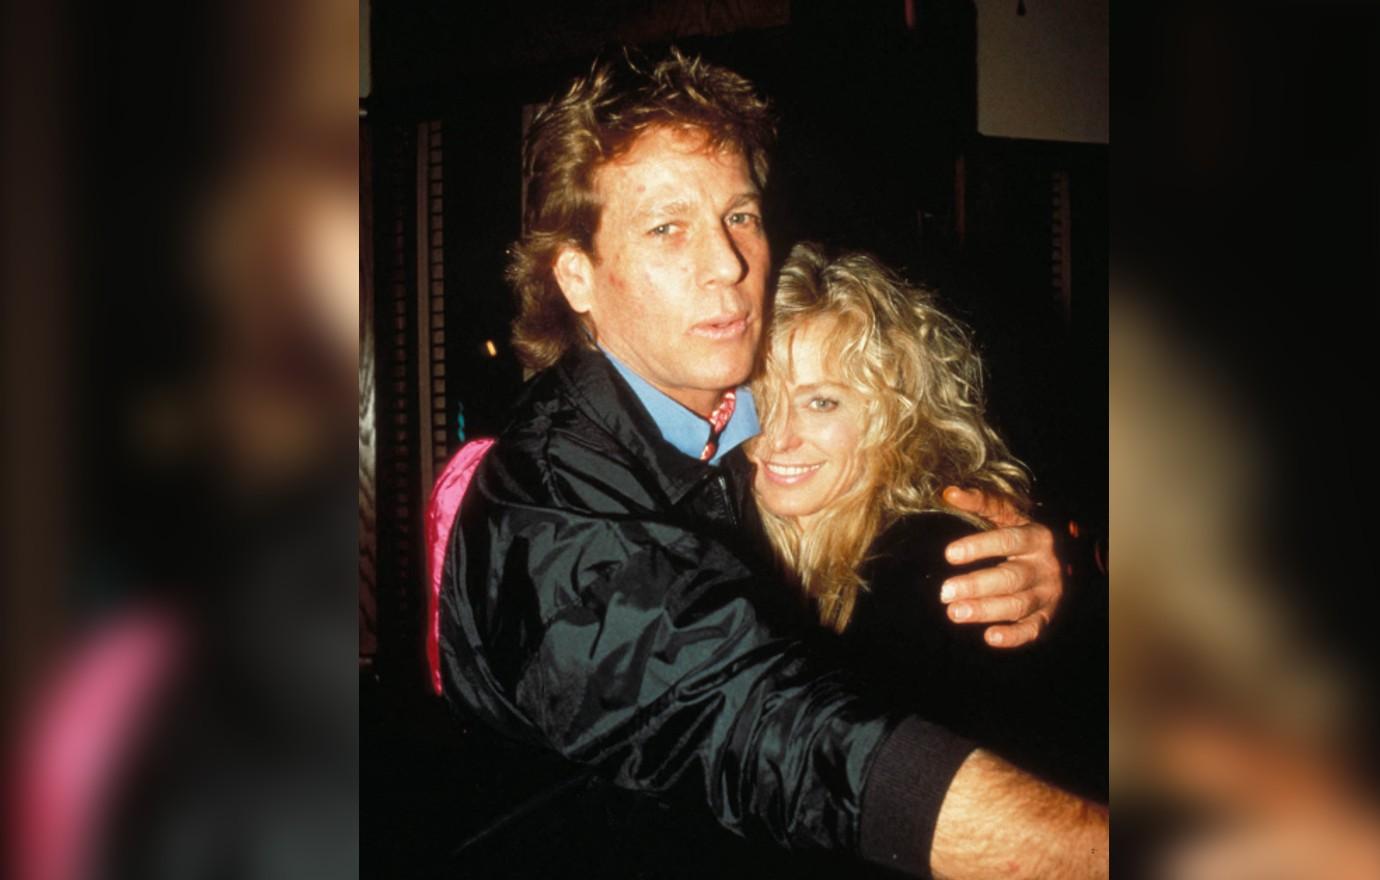 Ryan O'Neal Was Excited to Reunite With Farrah Fawcett When He Died